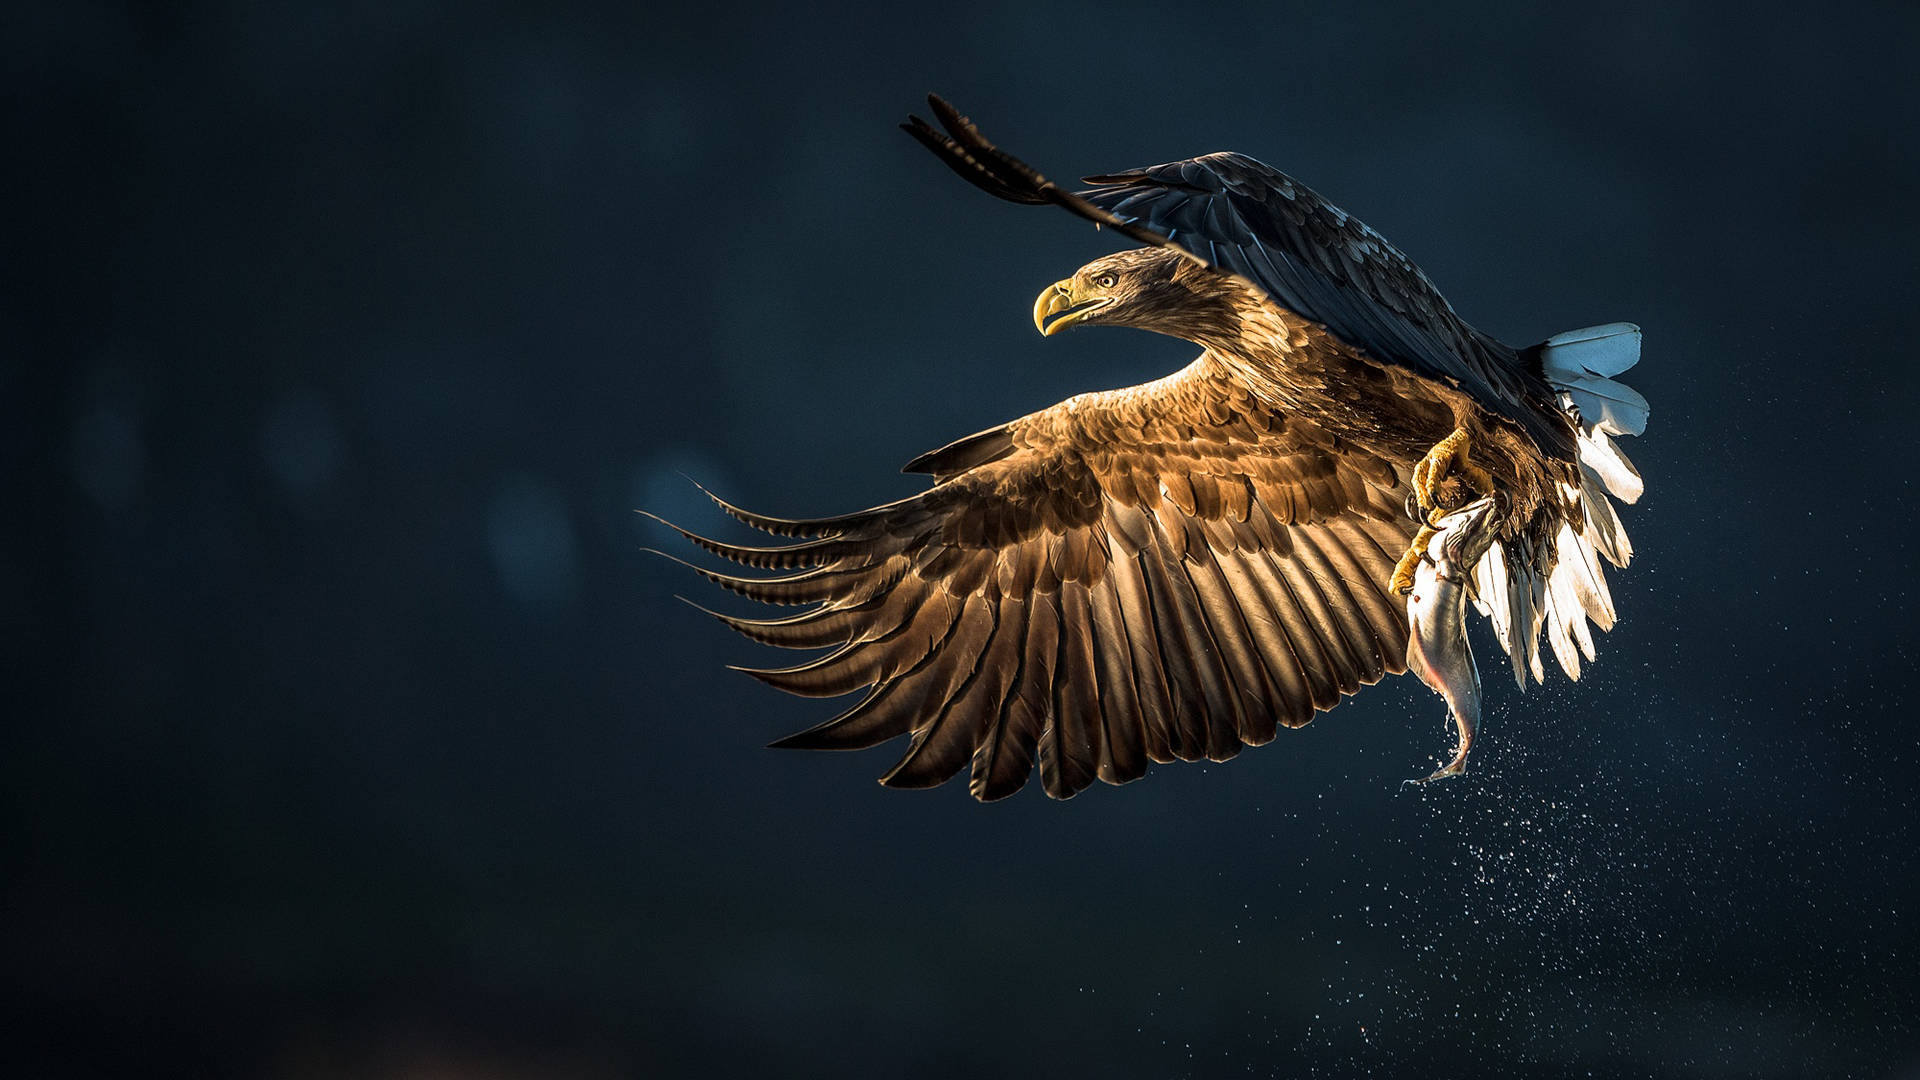 Eagle Mid-flap During Flight Background